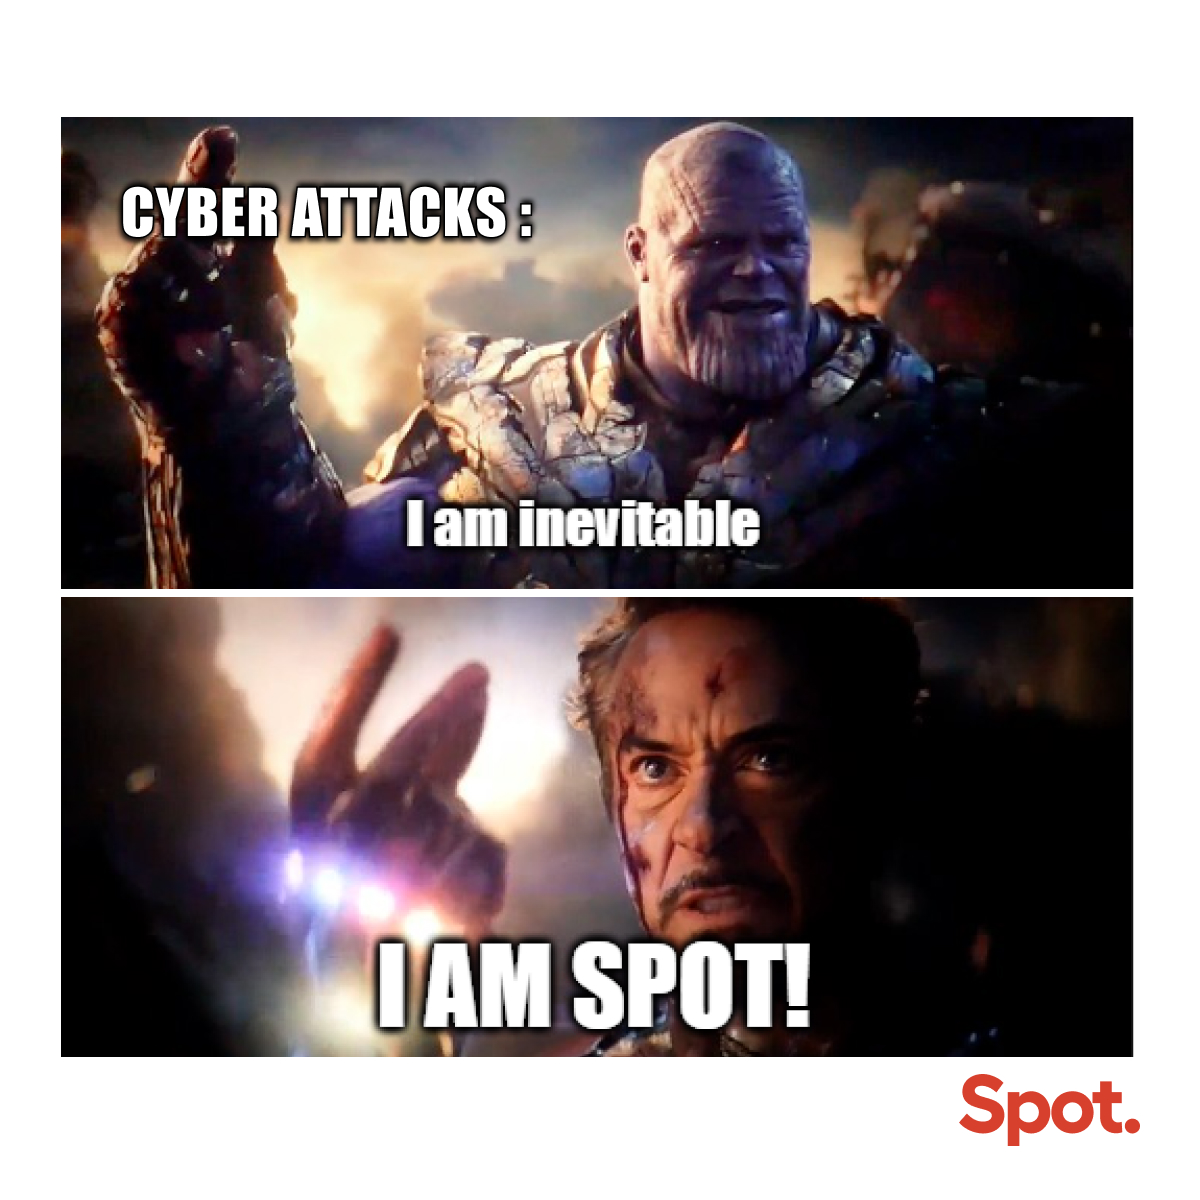 Spot: Securing the Cyberverse

#CyberSecurity  #Memes  #cybermemes #humour  #cyberattack  #networksecurity  #digitalsecurity #cyberthreats #AvengersEndGame  #IronMan  #cybersecuritysolutions #digitalprotection #spotonsecurity